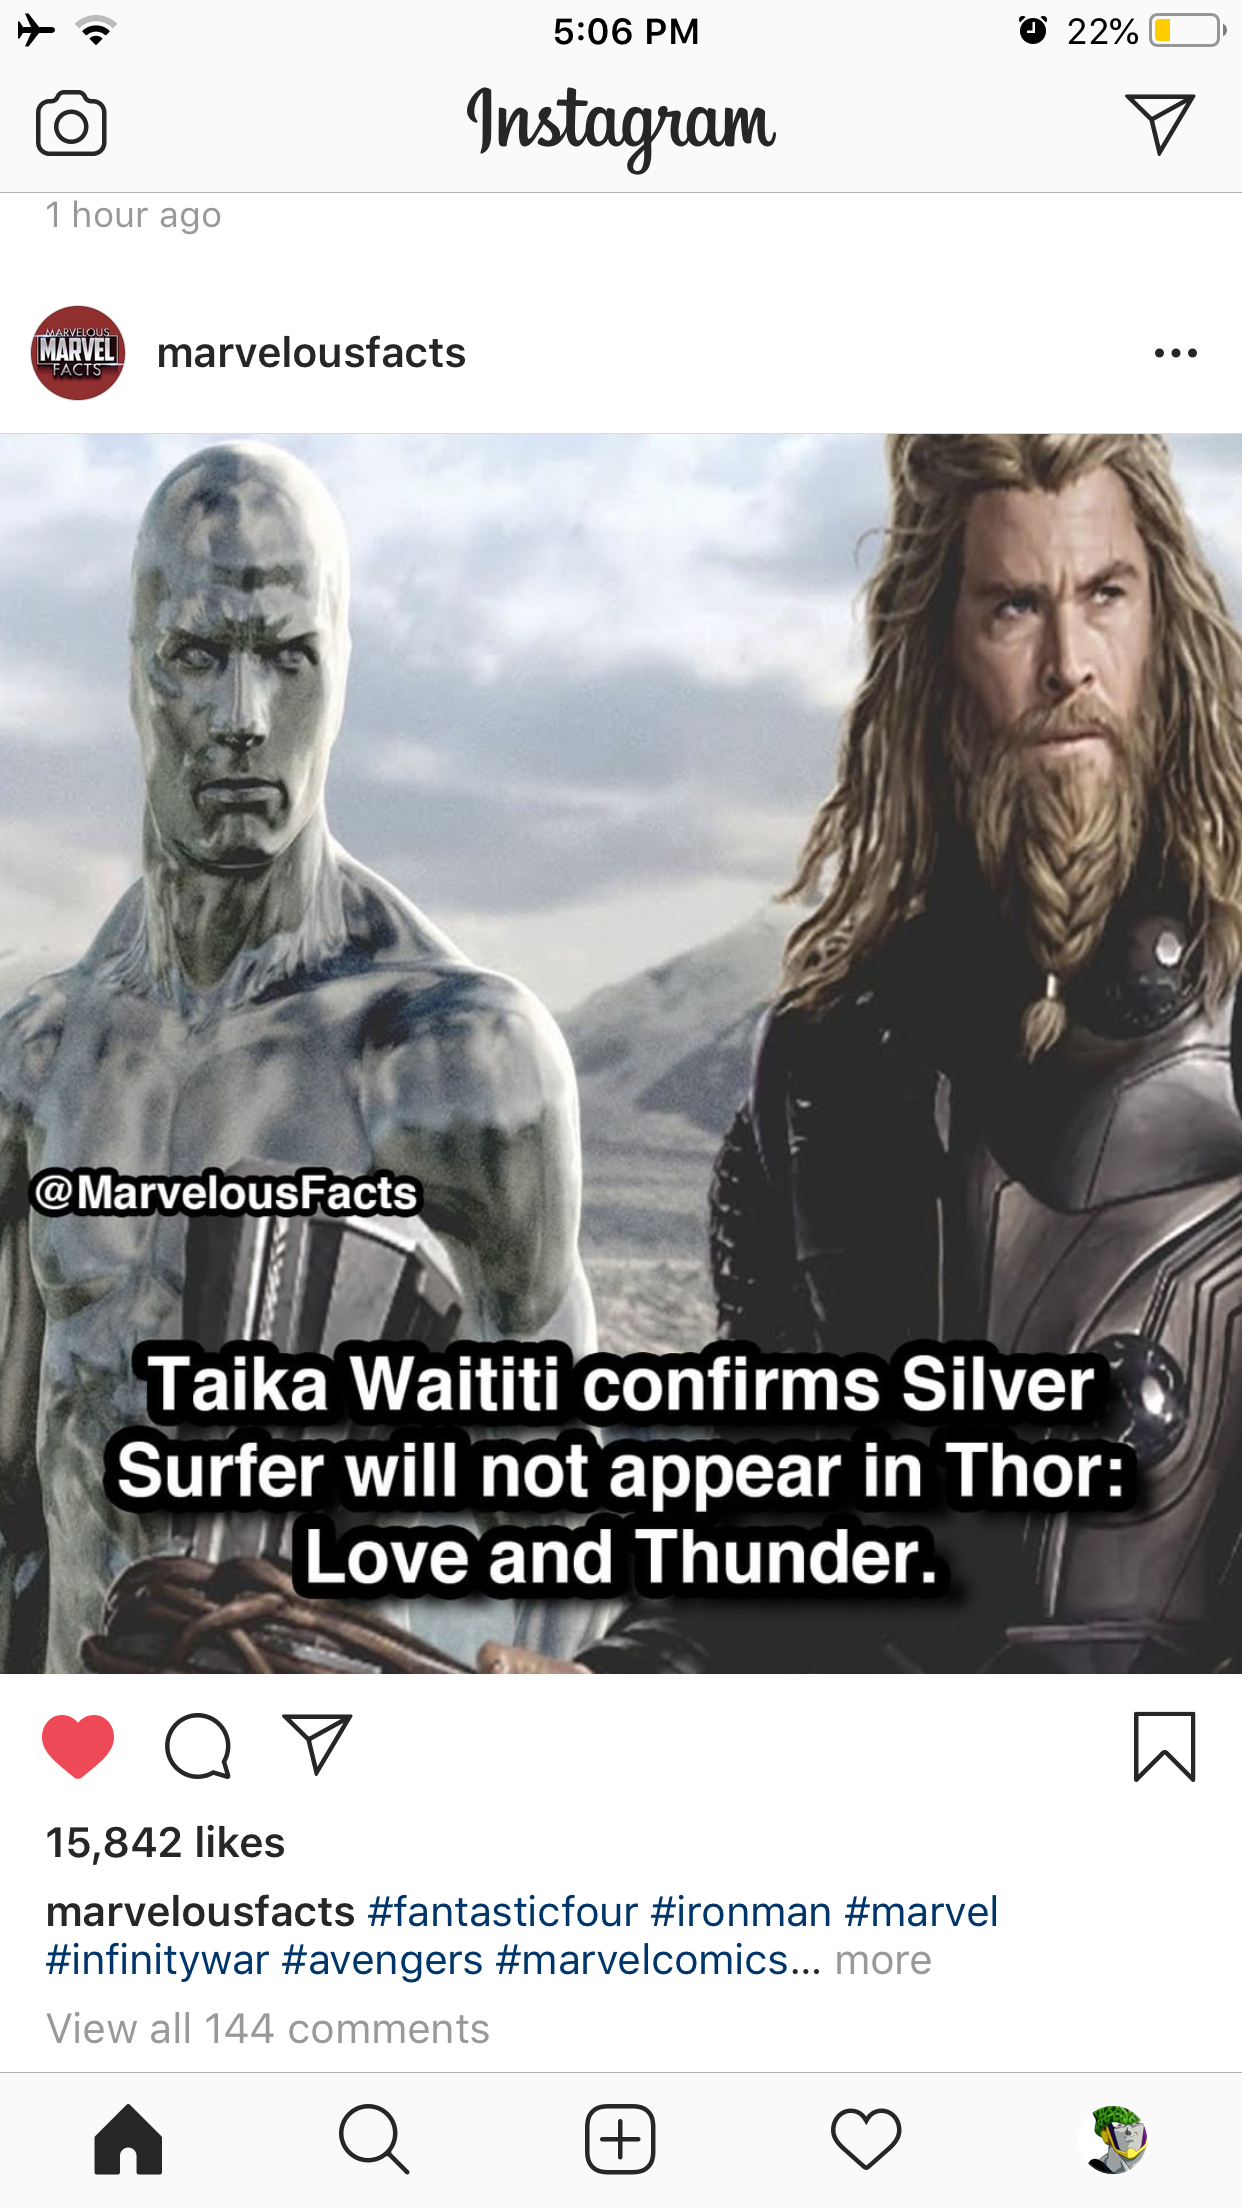 poster - o 22% D Instagram 1 hour ago Hlavii marvelousfacts Taika Waititi confirms Silver Surfer will not appear in Thor Love and Thunder. a Qy 15,842 marvelousfacts ... more View all 144